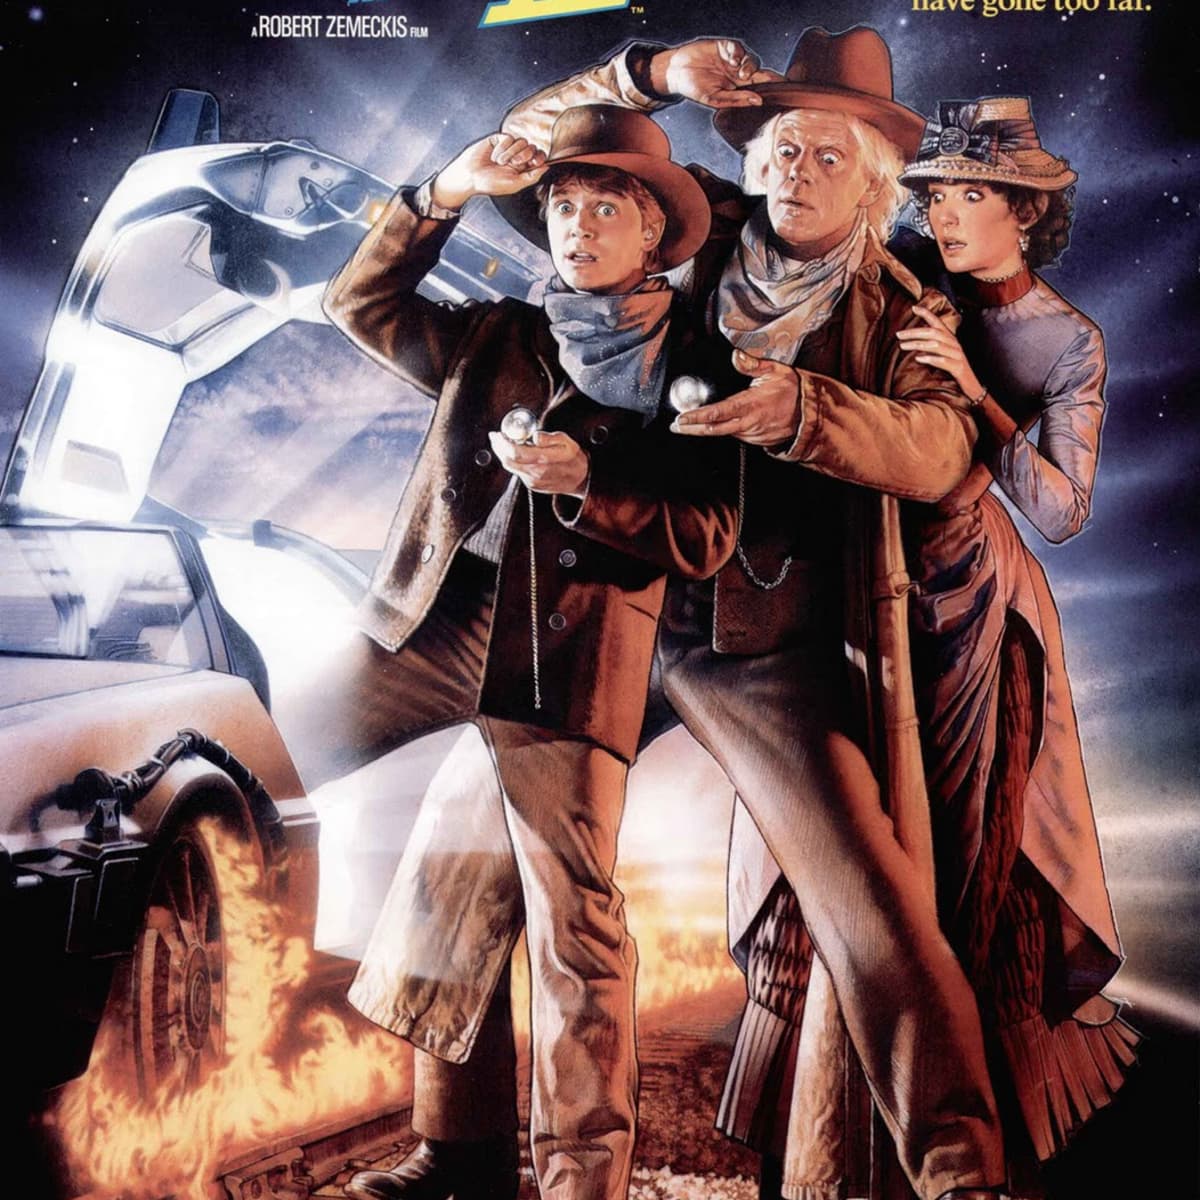 where can i watch back to the future 3